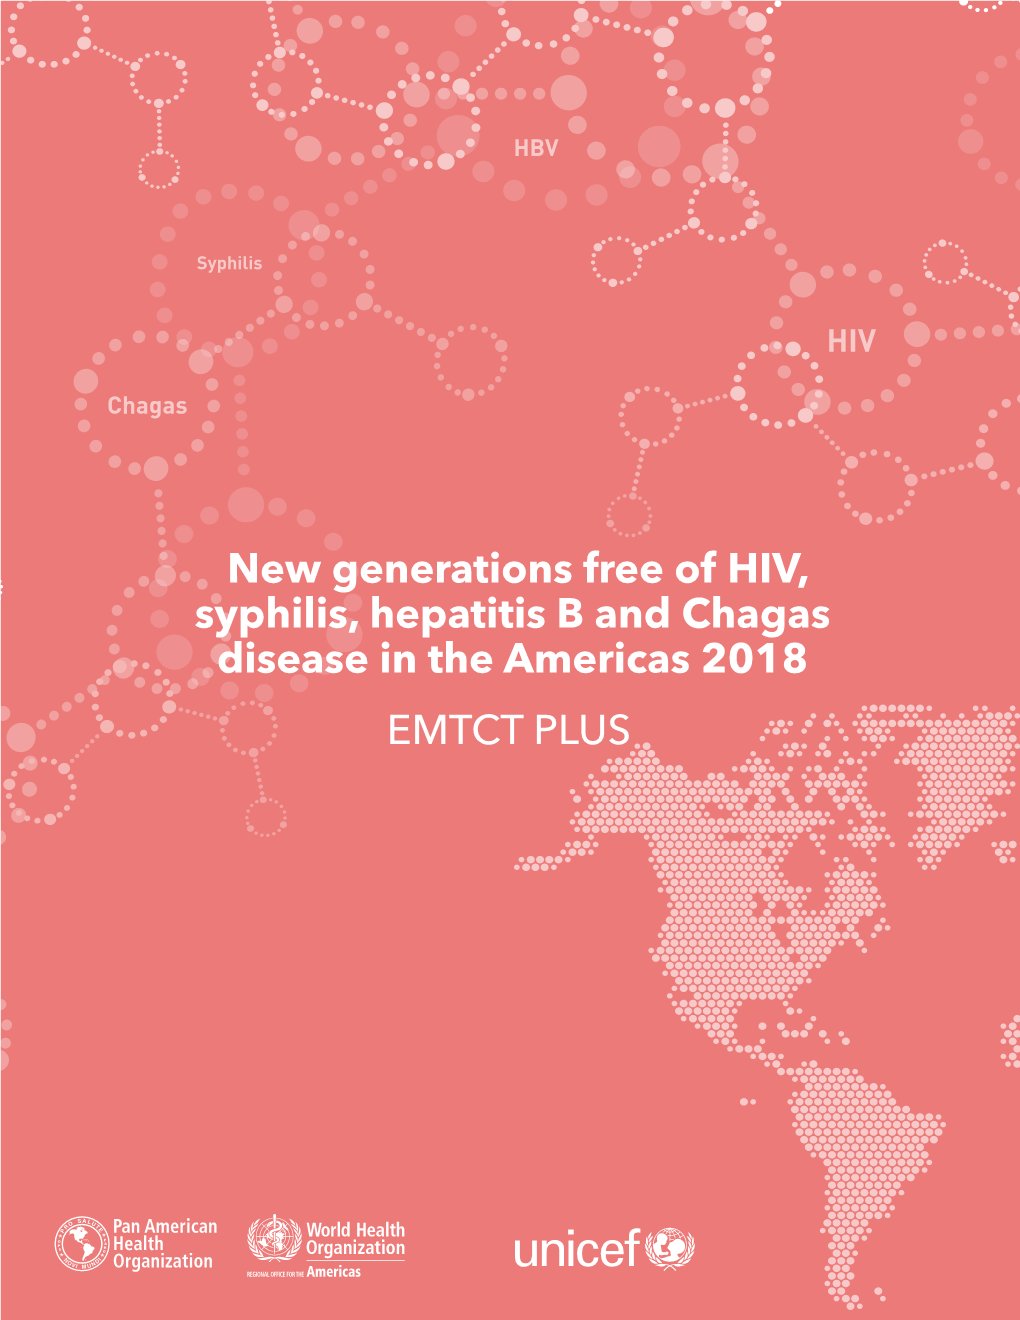 New Generations Free of HIV, Syphilis, Hepatitis B and Chagas Disease in the Americas 2018 EMTCT PLUS